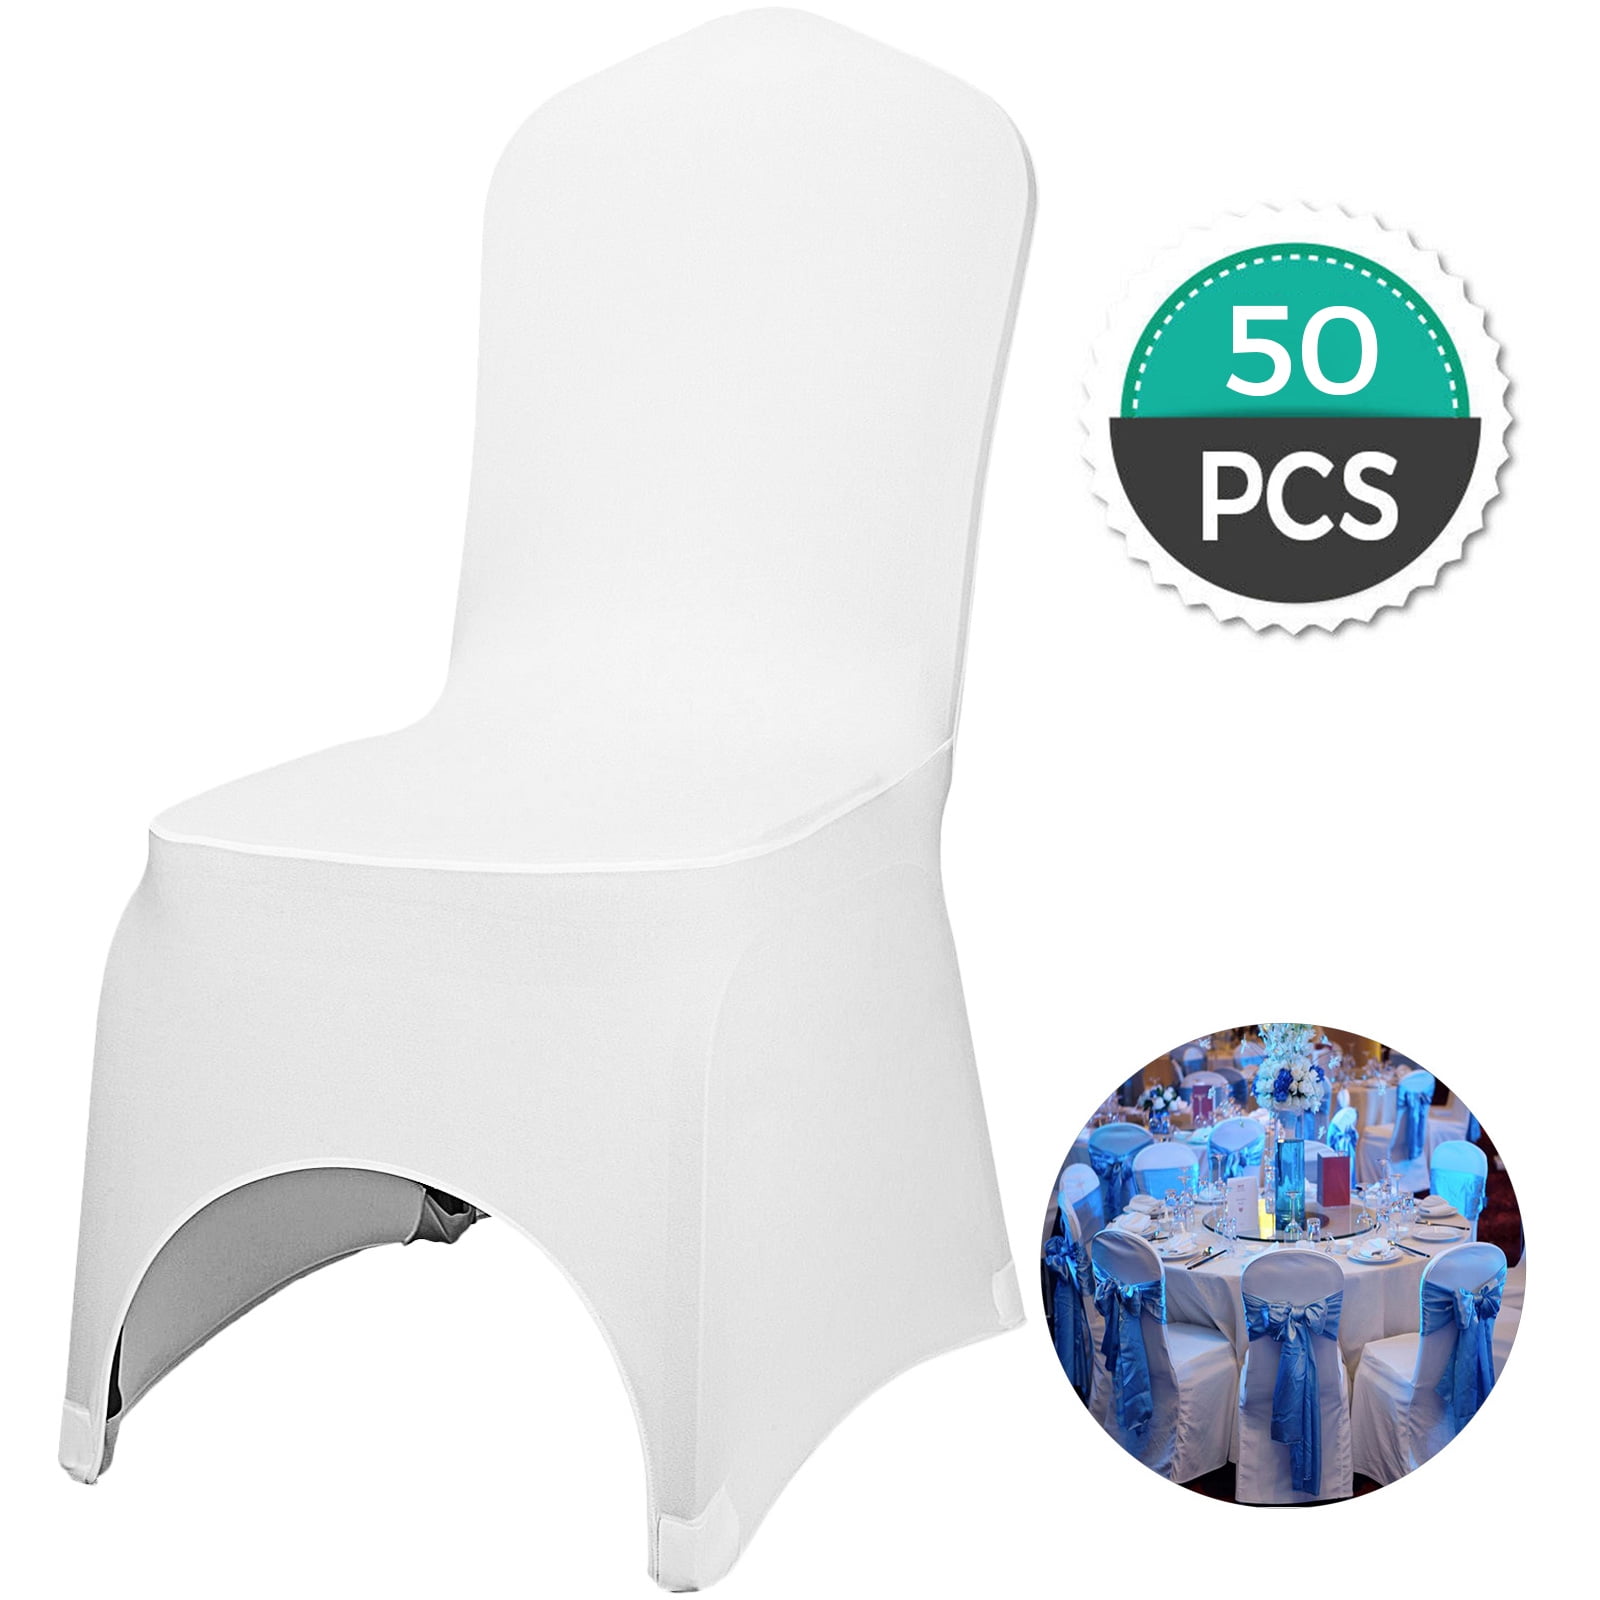 VEVORbrand 50 PCS White Chair Covers Polyester Spandex Chair Cover Stretch  Slipcovers for Wedding Party Dining Banquet Chair Decoration Covers 